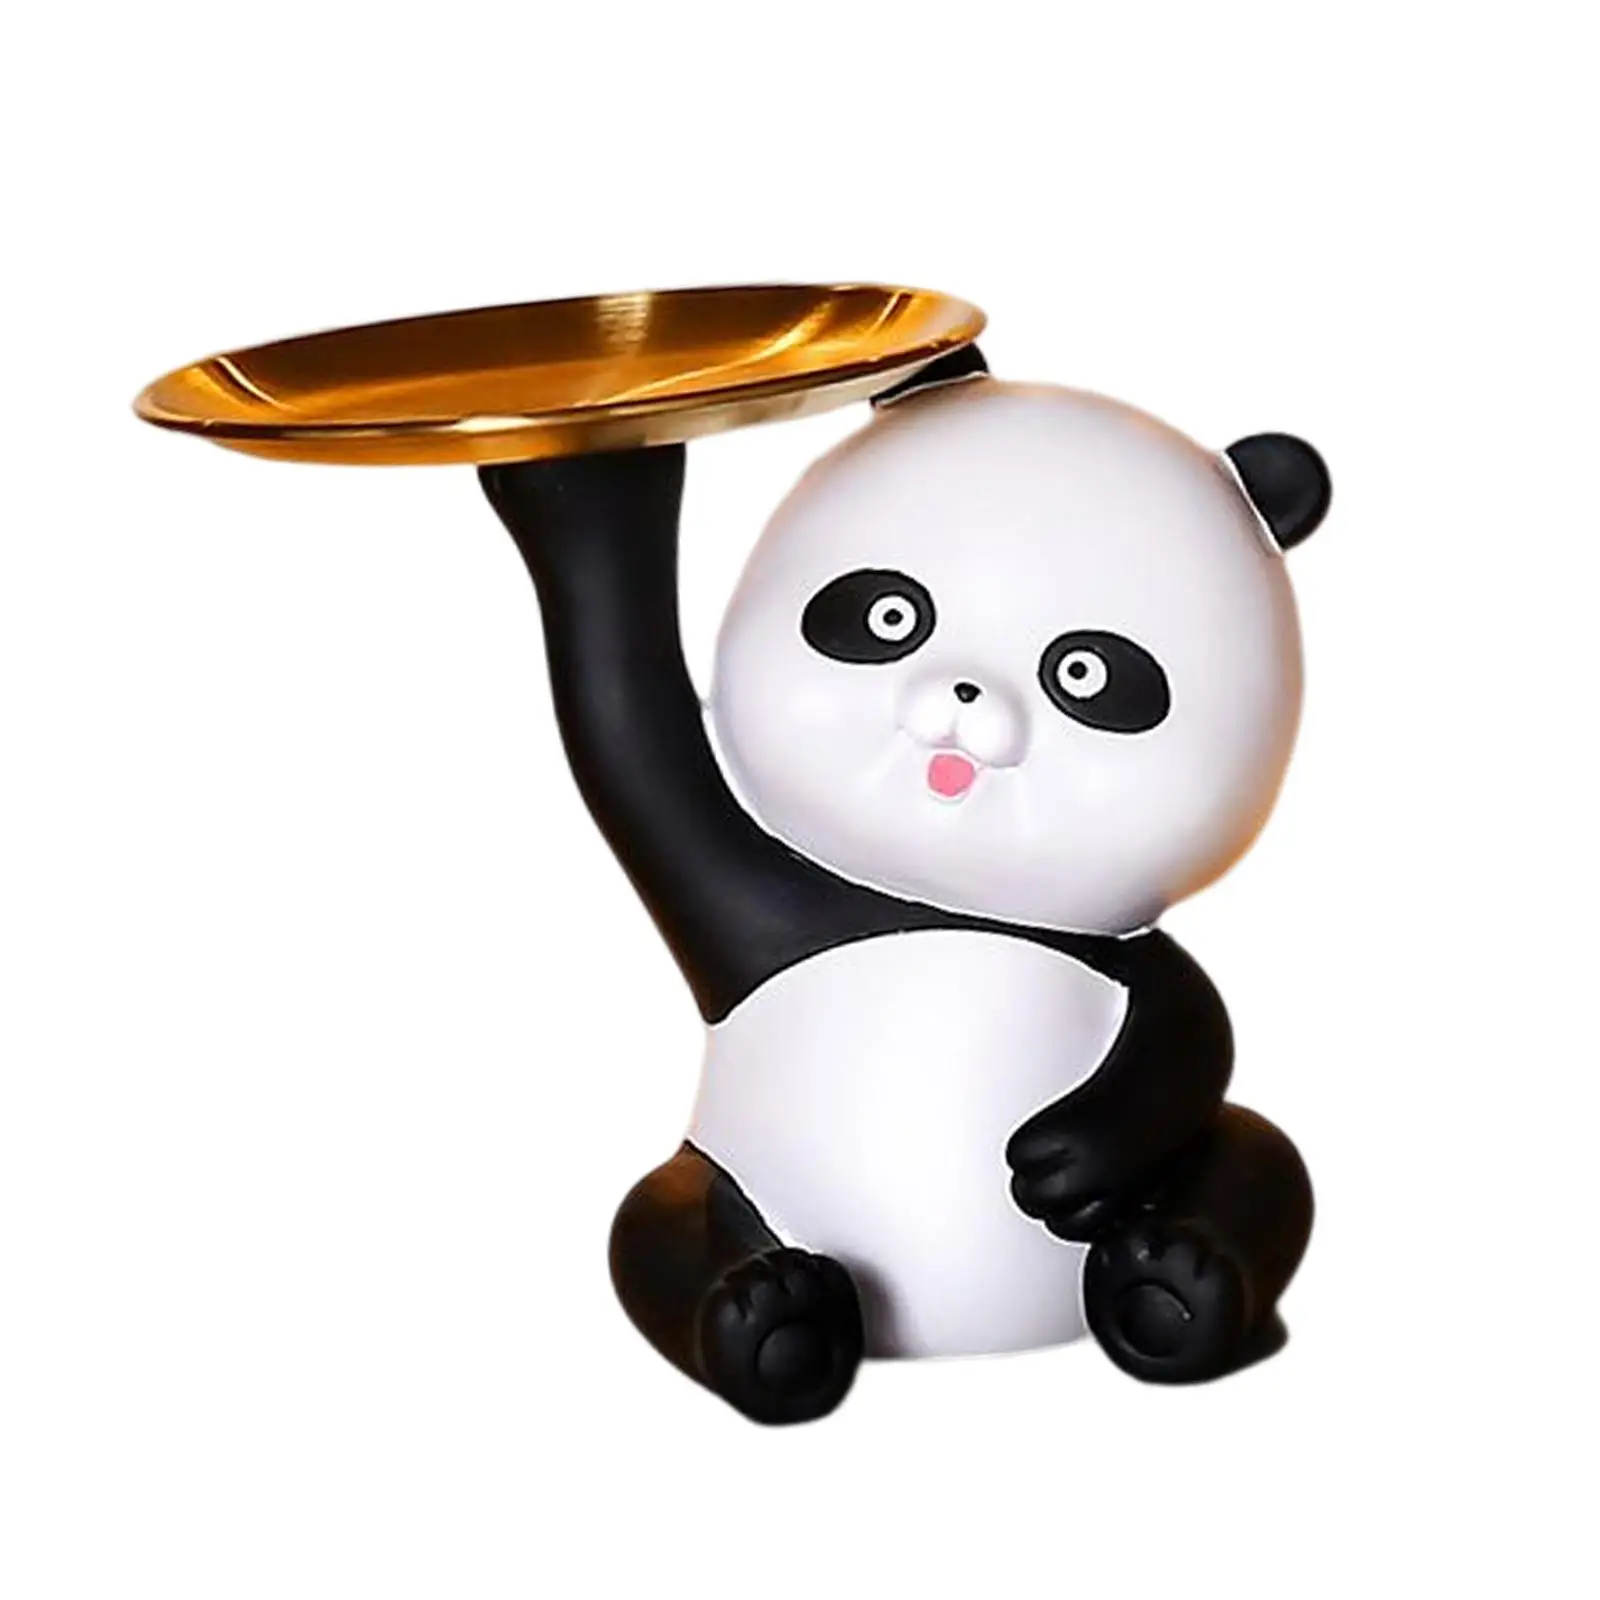 Multifunction Panda Sculpture with Storage Tray for Entrance Decoration